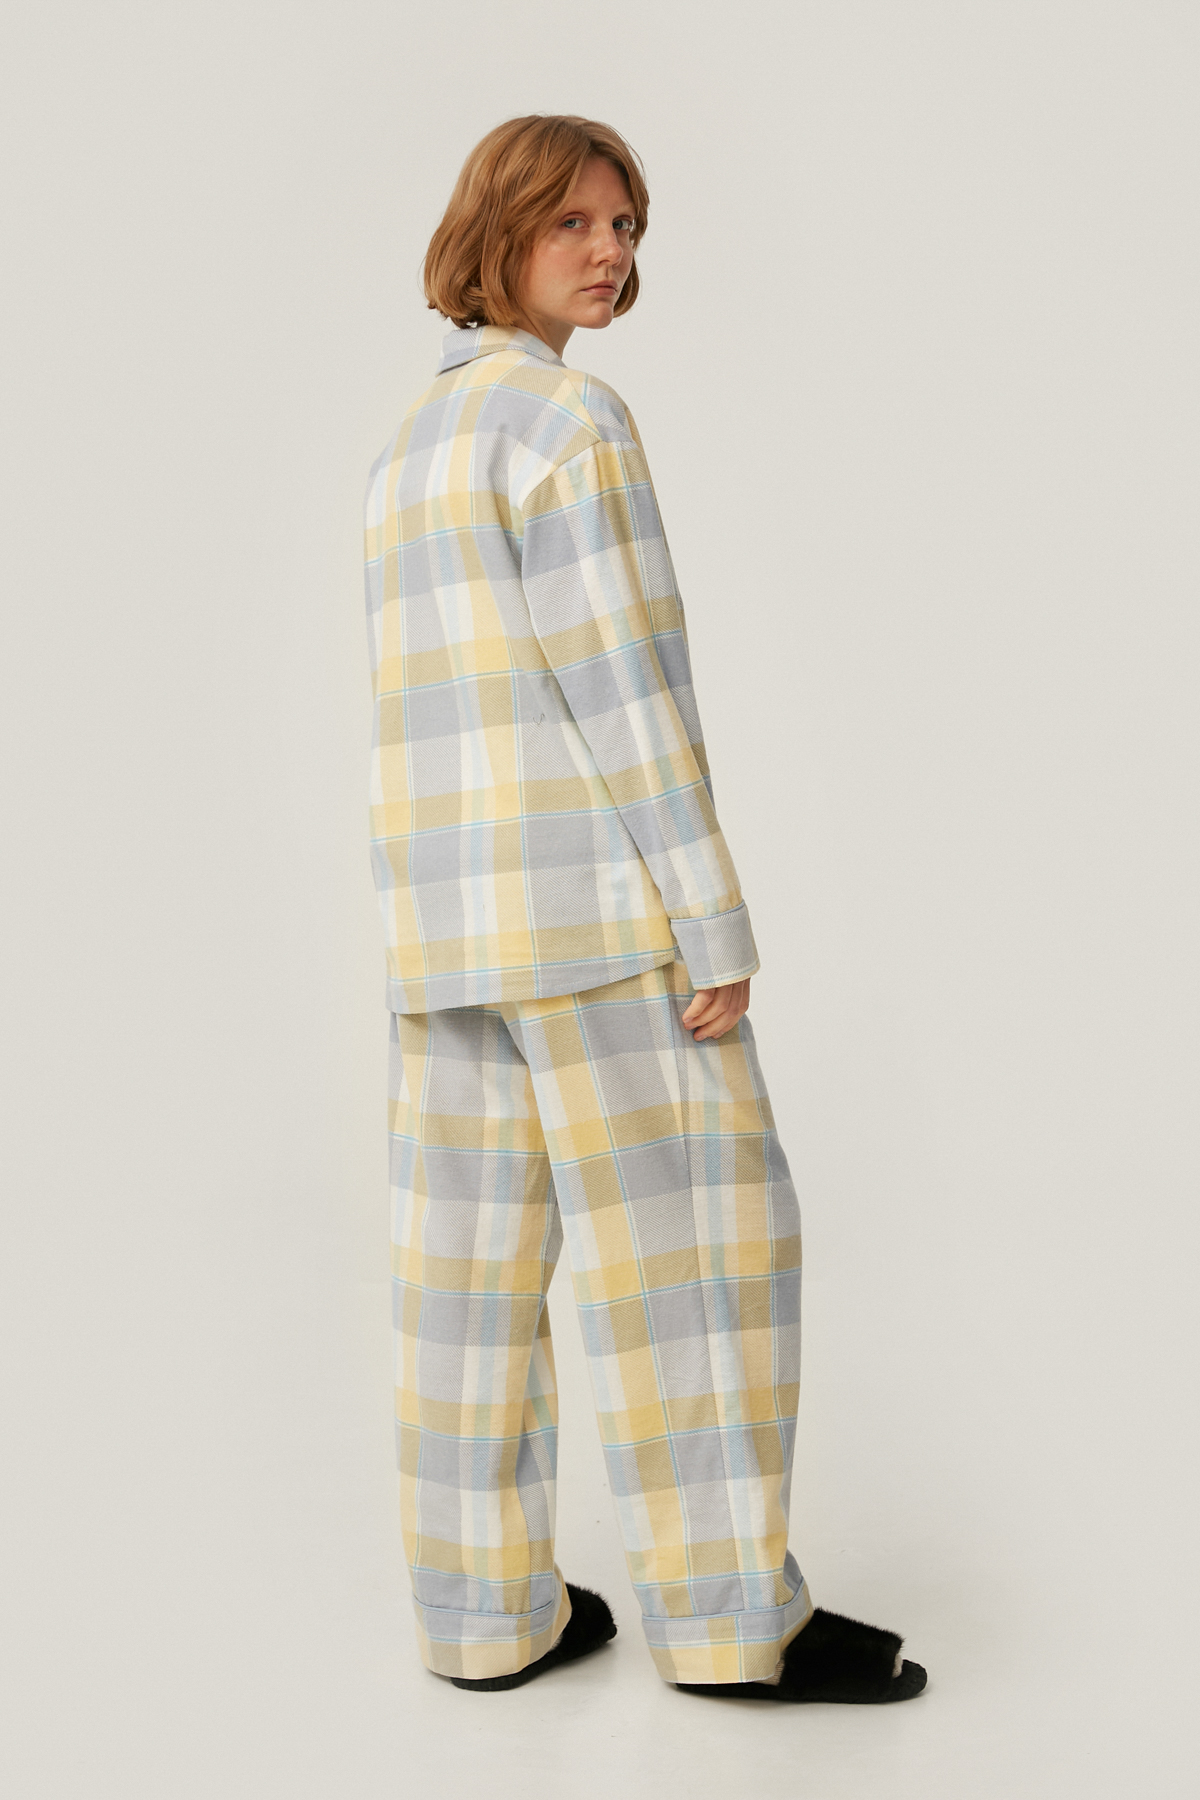 Pajama flanelette loose-fit pants in yellow and blue check, photo 3